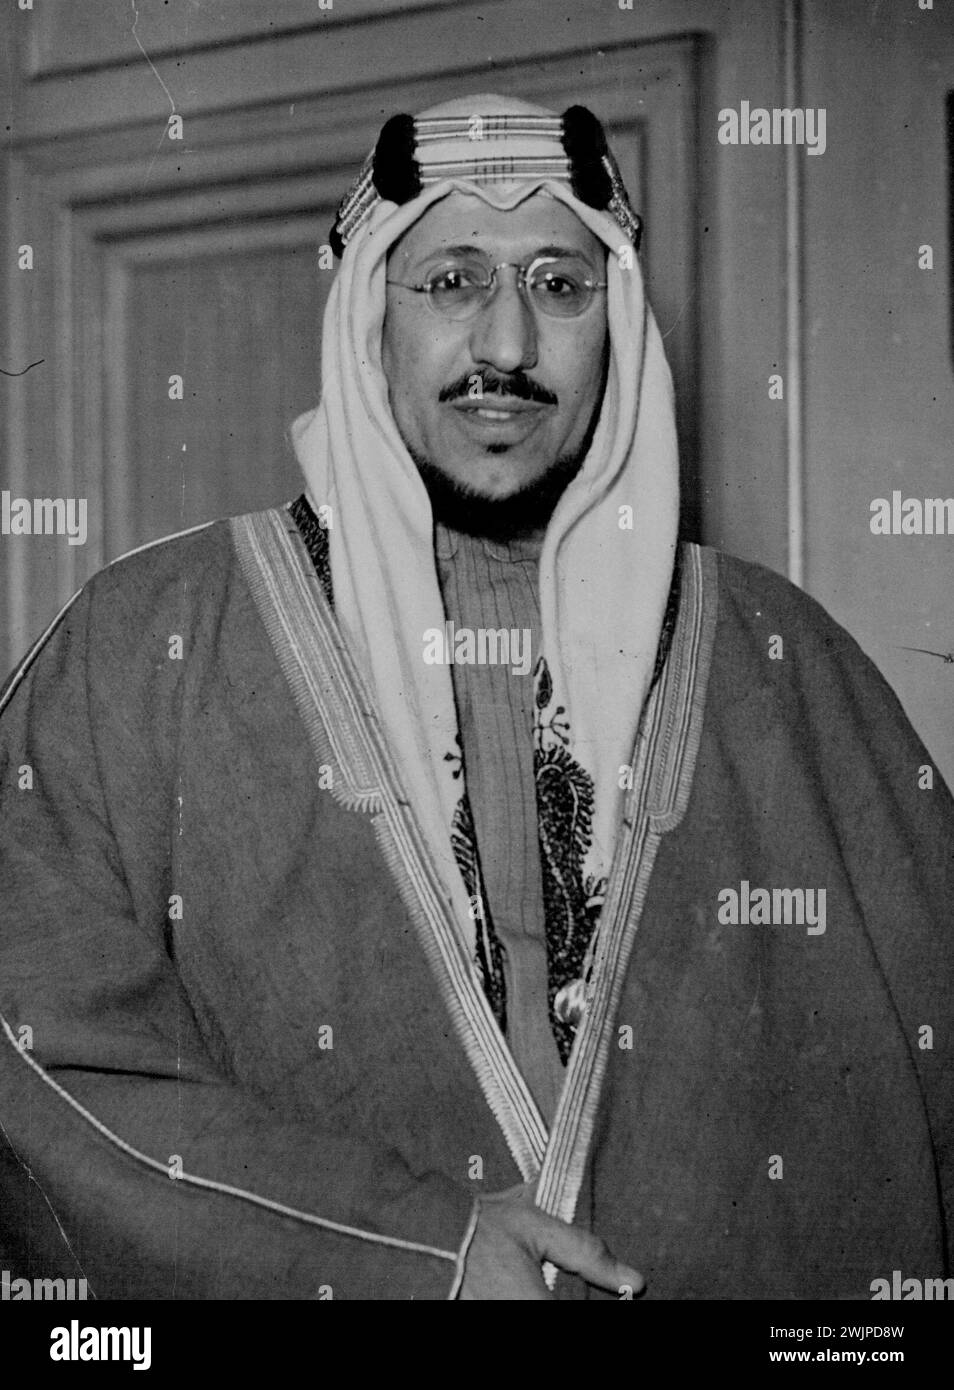 The Handsome Prince -- The Emir Saud crown prince of Saudi Arabia, has arrives in London. 6ft. 4 ins. tall, he is considered to be one of ***** in his country. March 03, 1947. Stock Photo